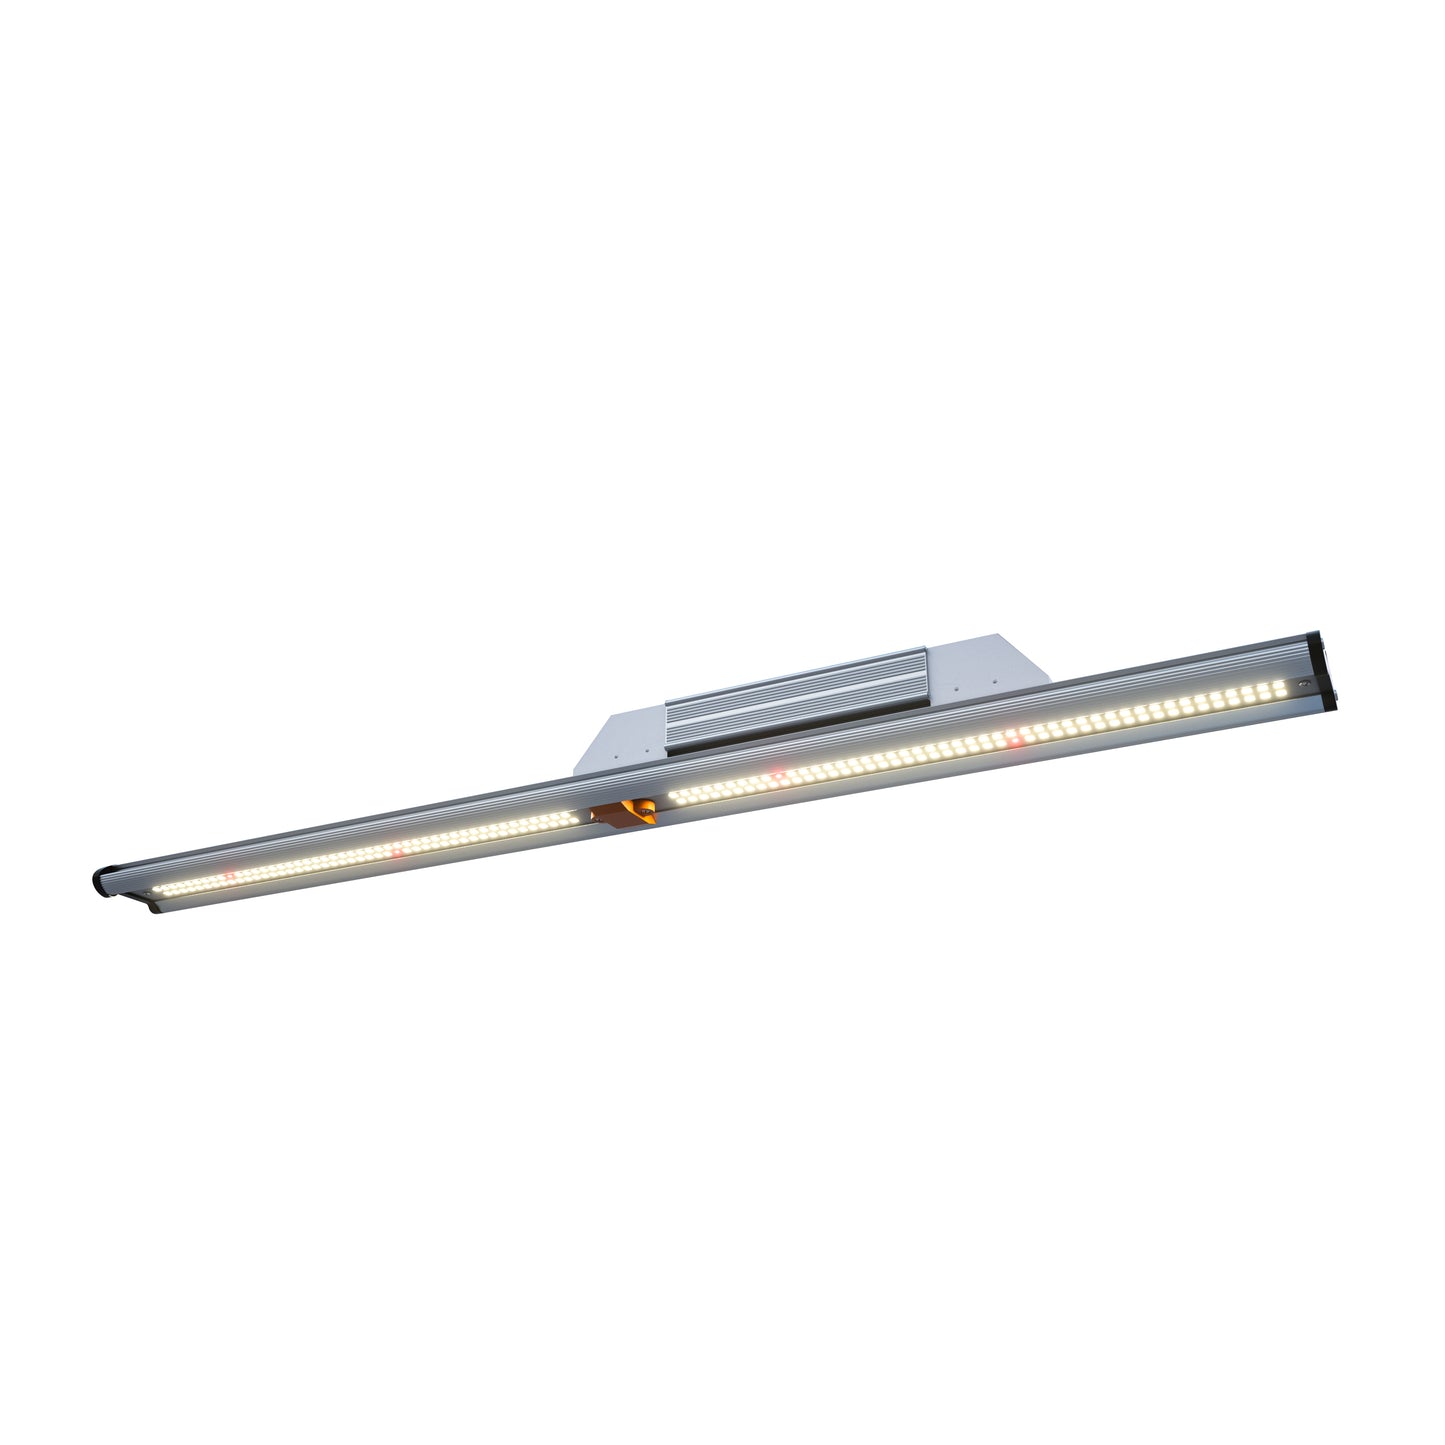 Bright Light Italy Led Bar 60W - Led Coltivazione Indoor